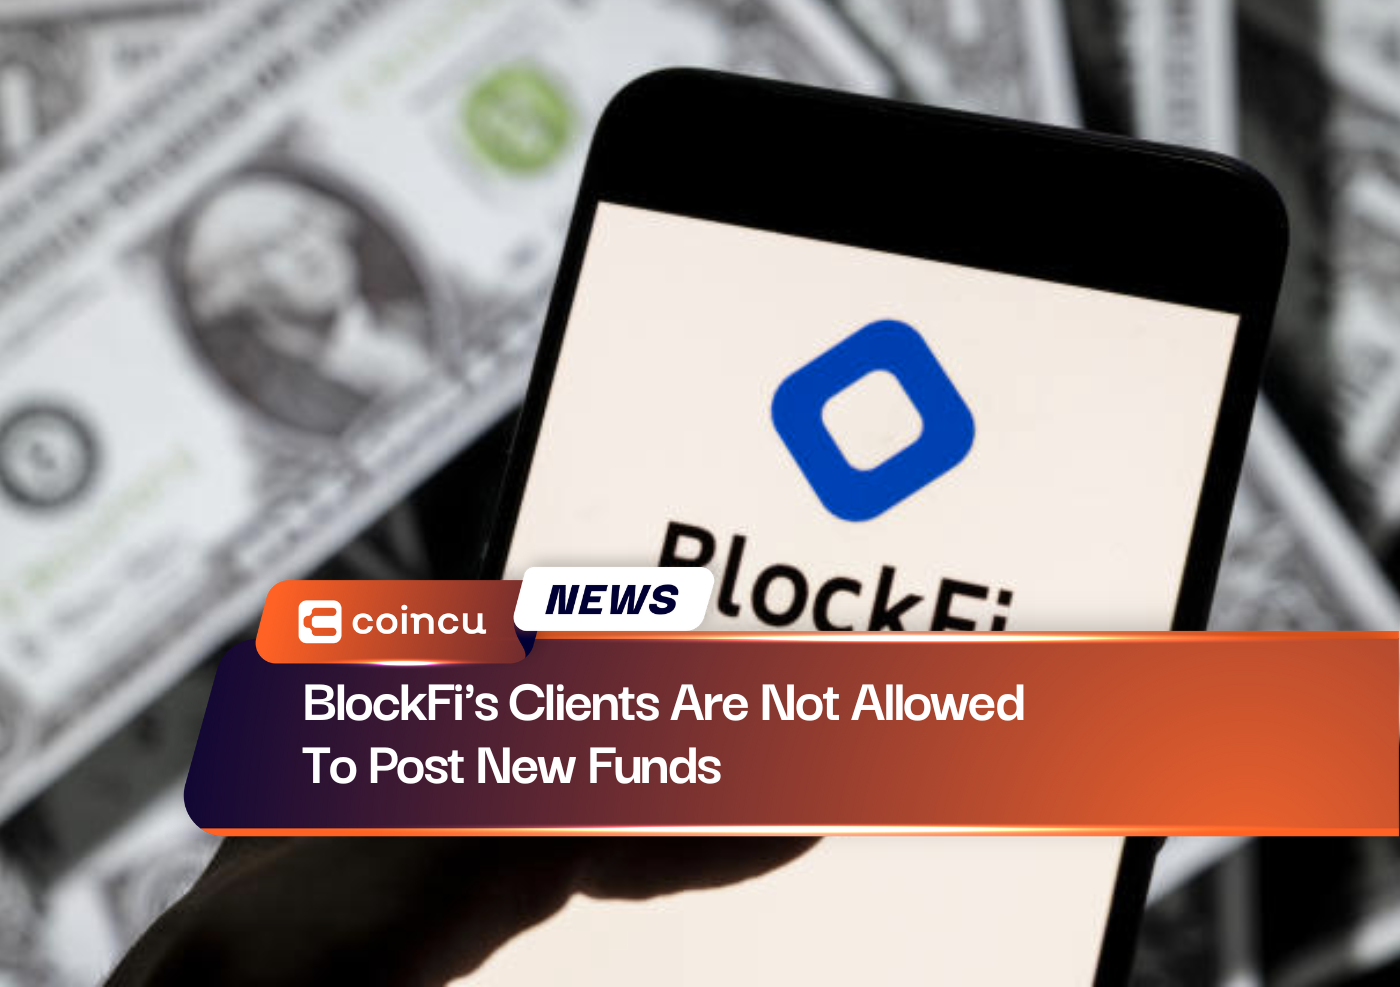 BlockFi's Clients Are Not Allowed To Post New Funds